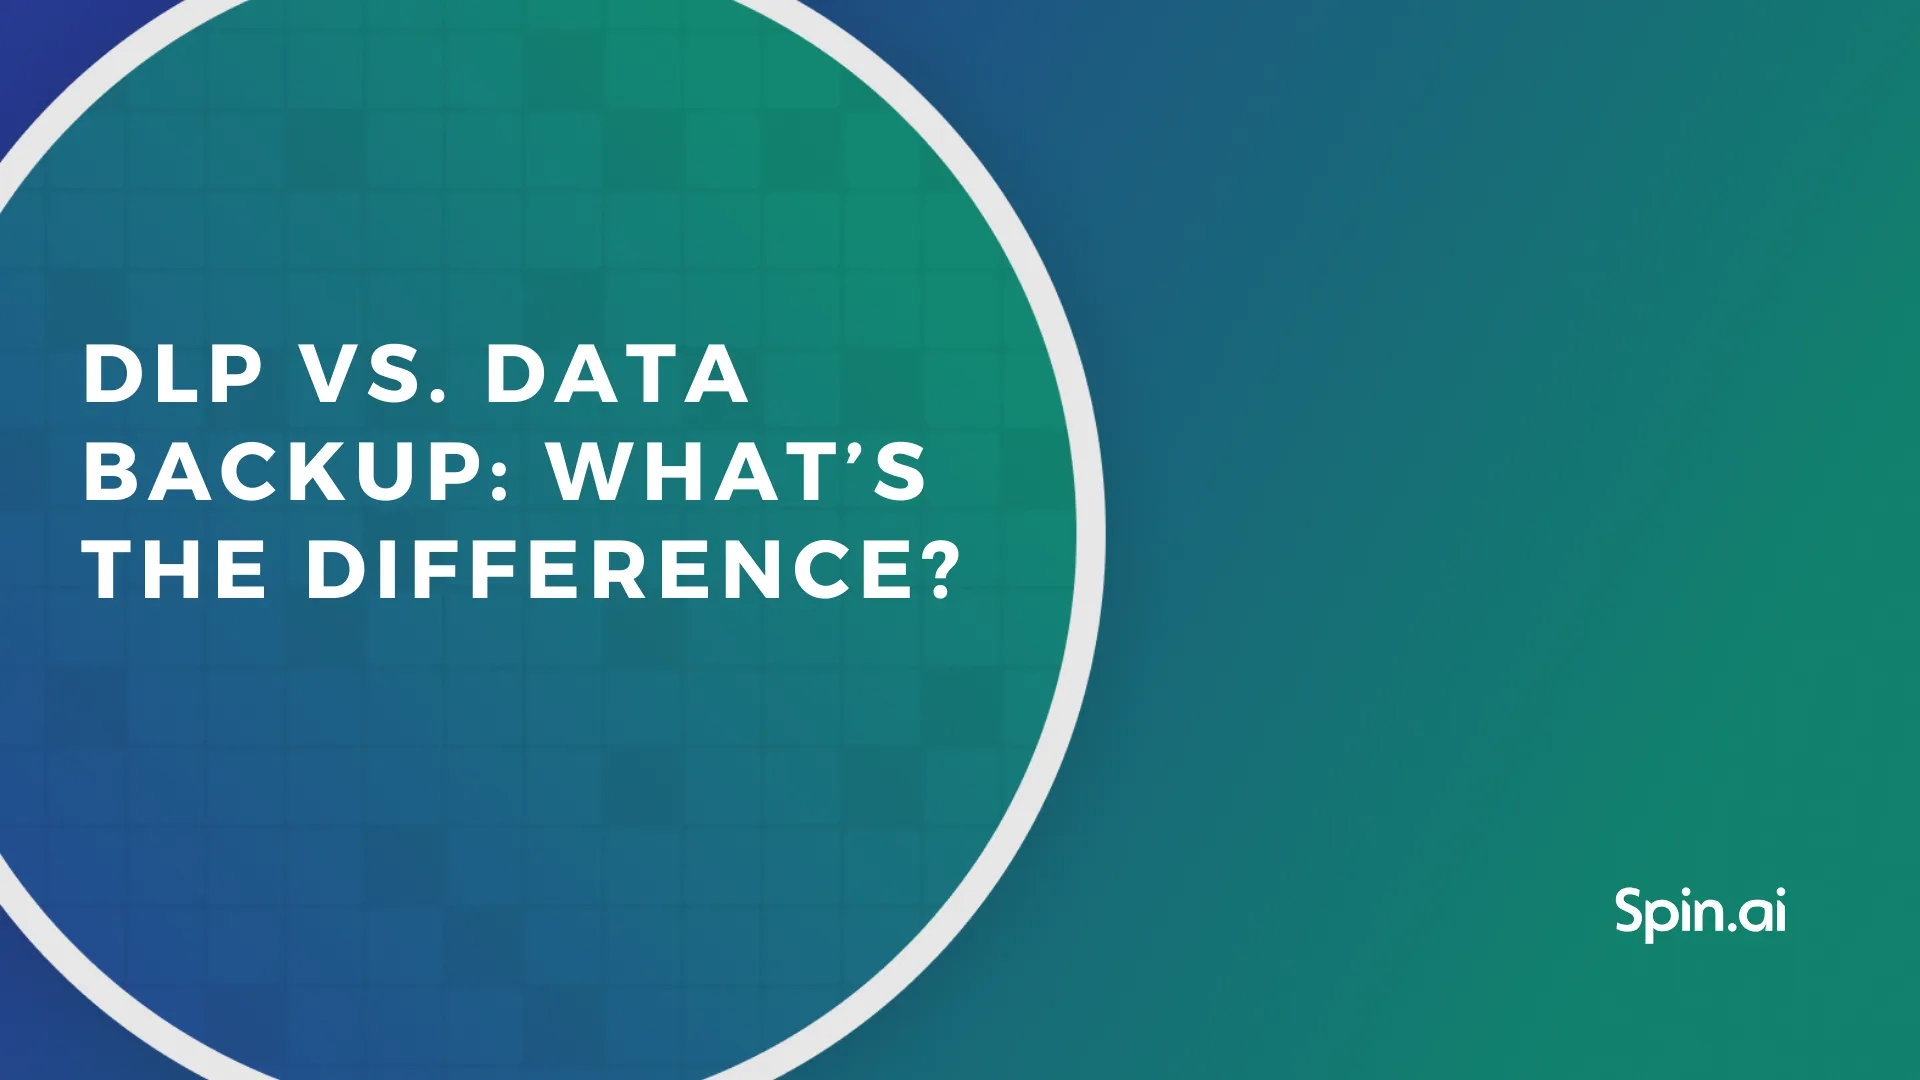 DLP vs. Data Backup: What’s the difference?